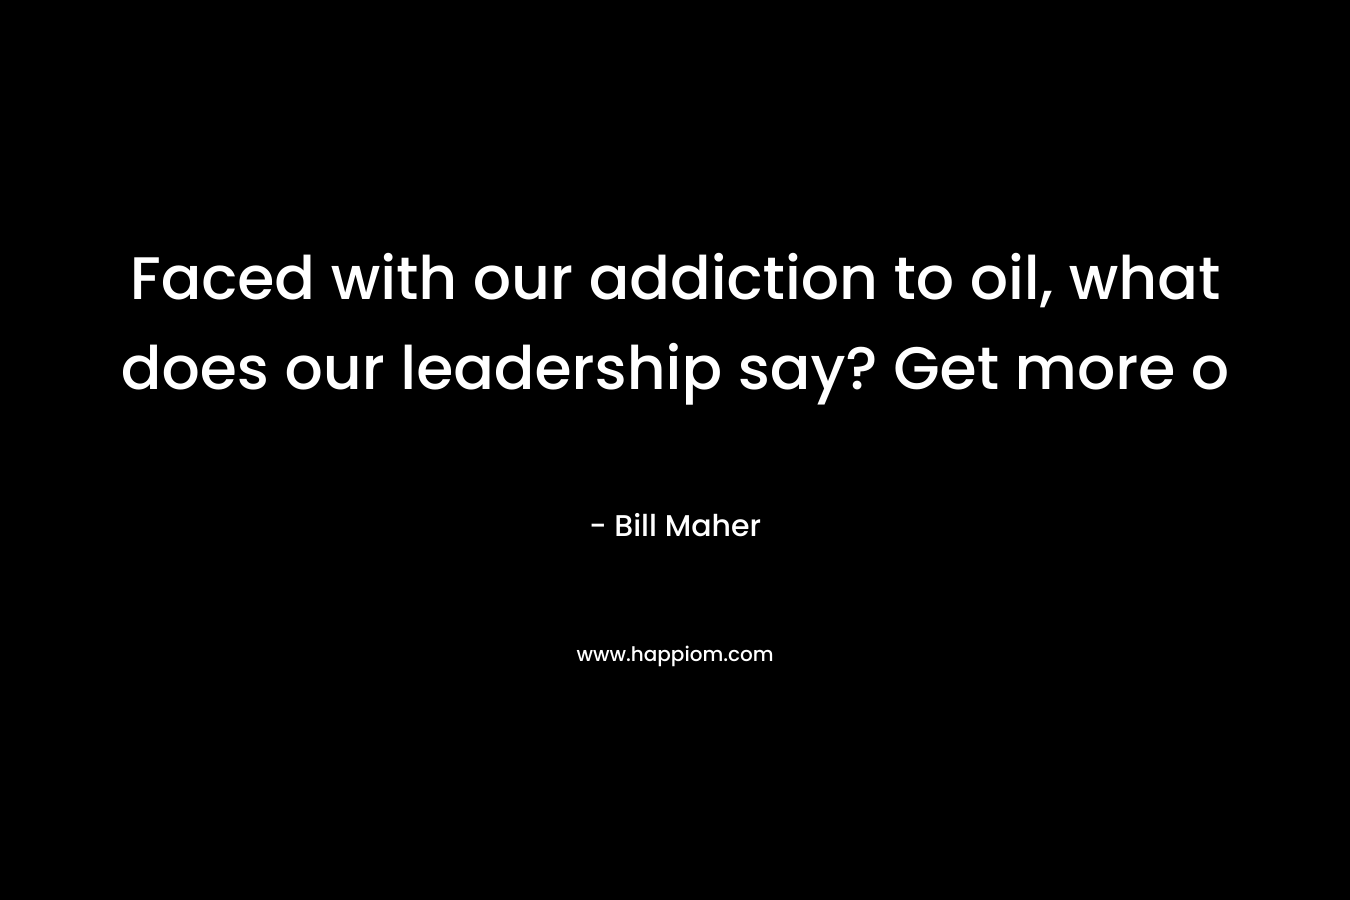 Faced with our addiction to oil, what does our leadership say? Get more o – Bill Maher